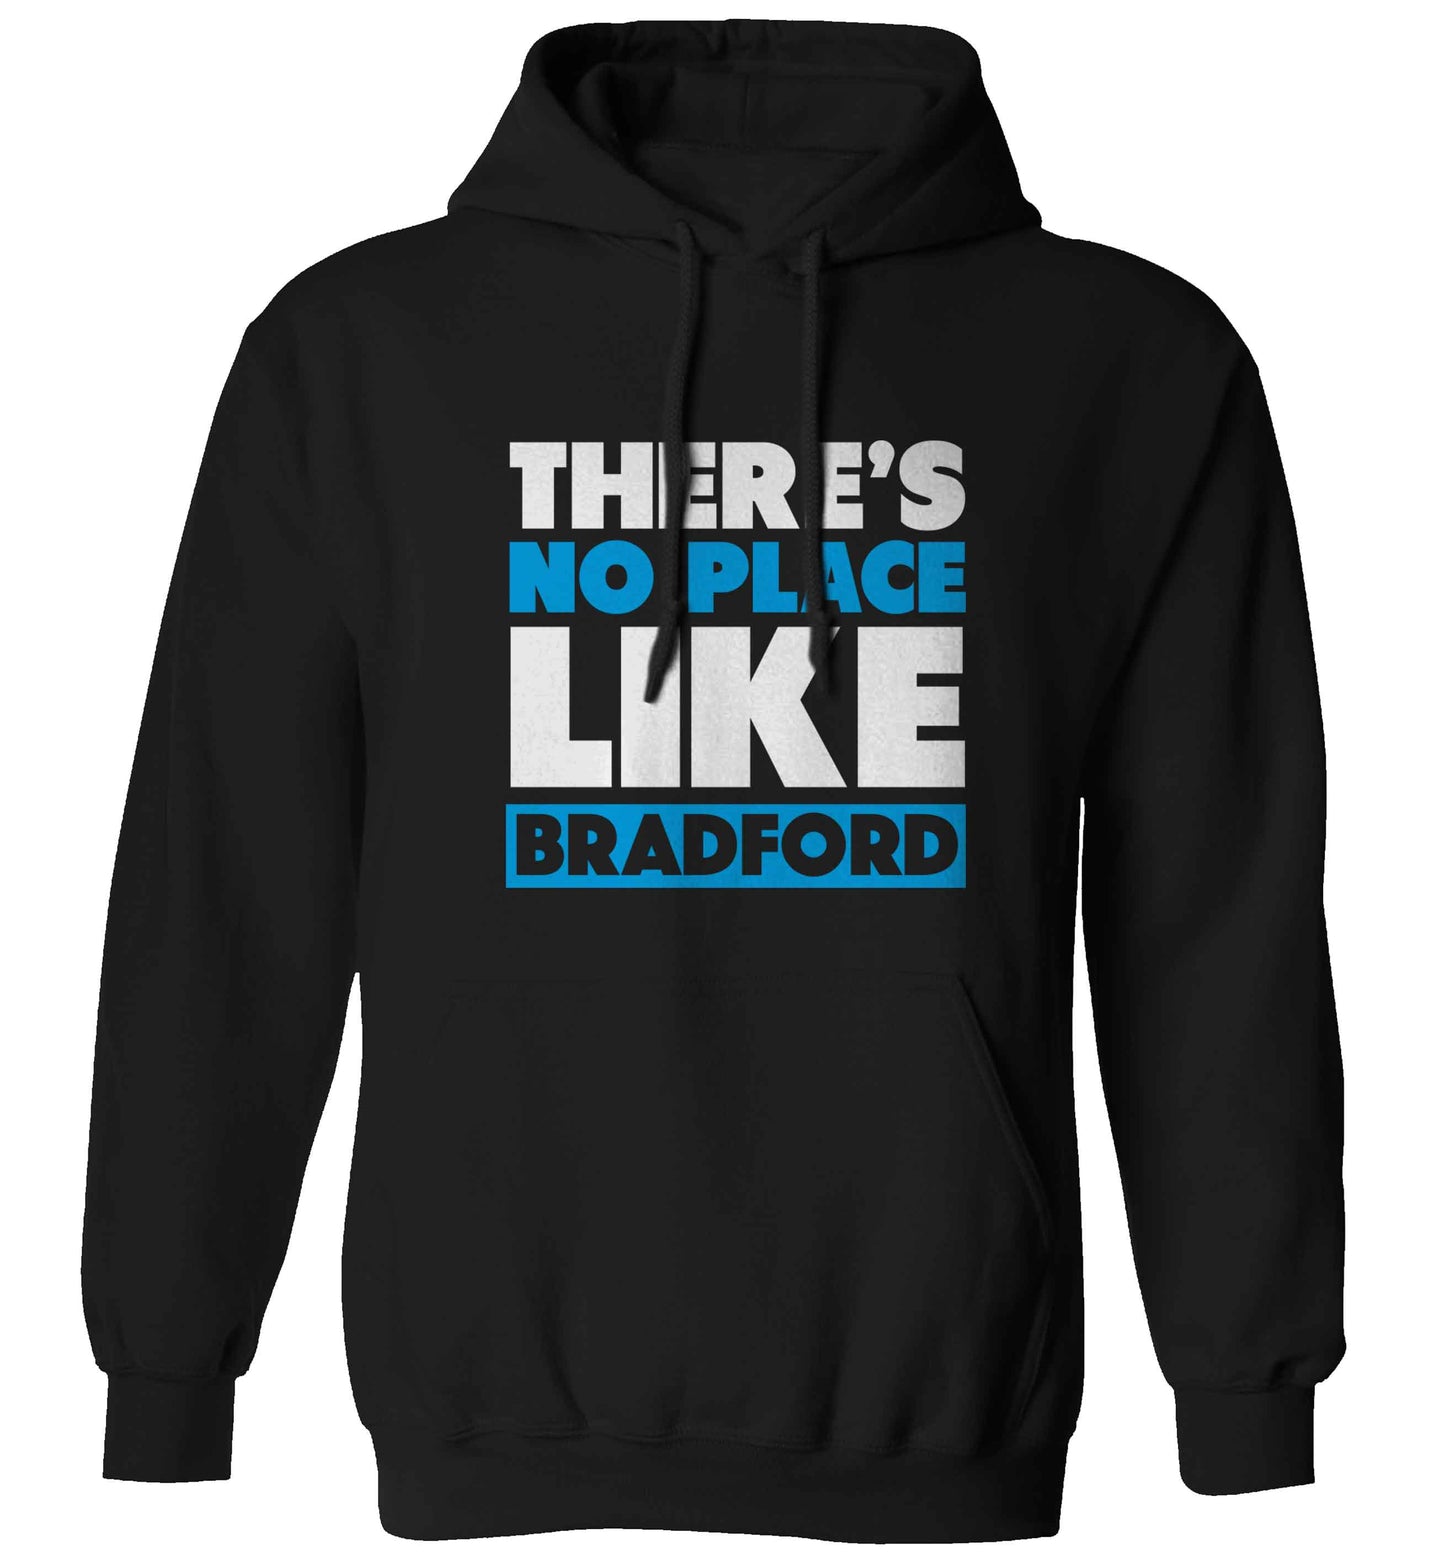 There's no place like Bradford adults unisex black hoodie 2XL